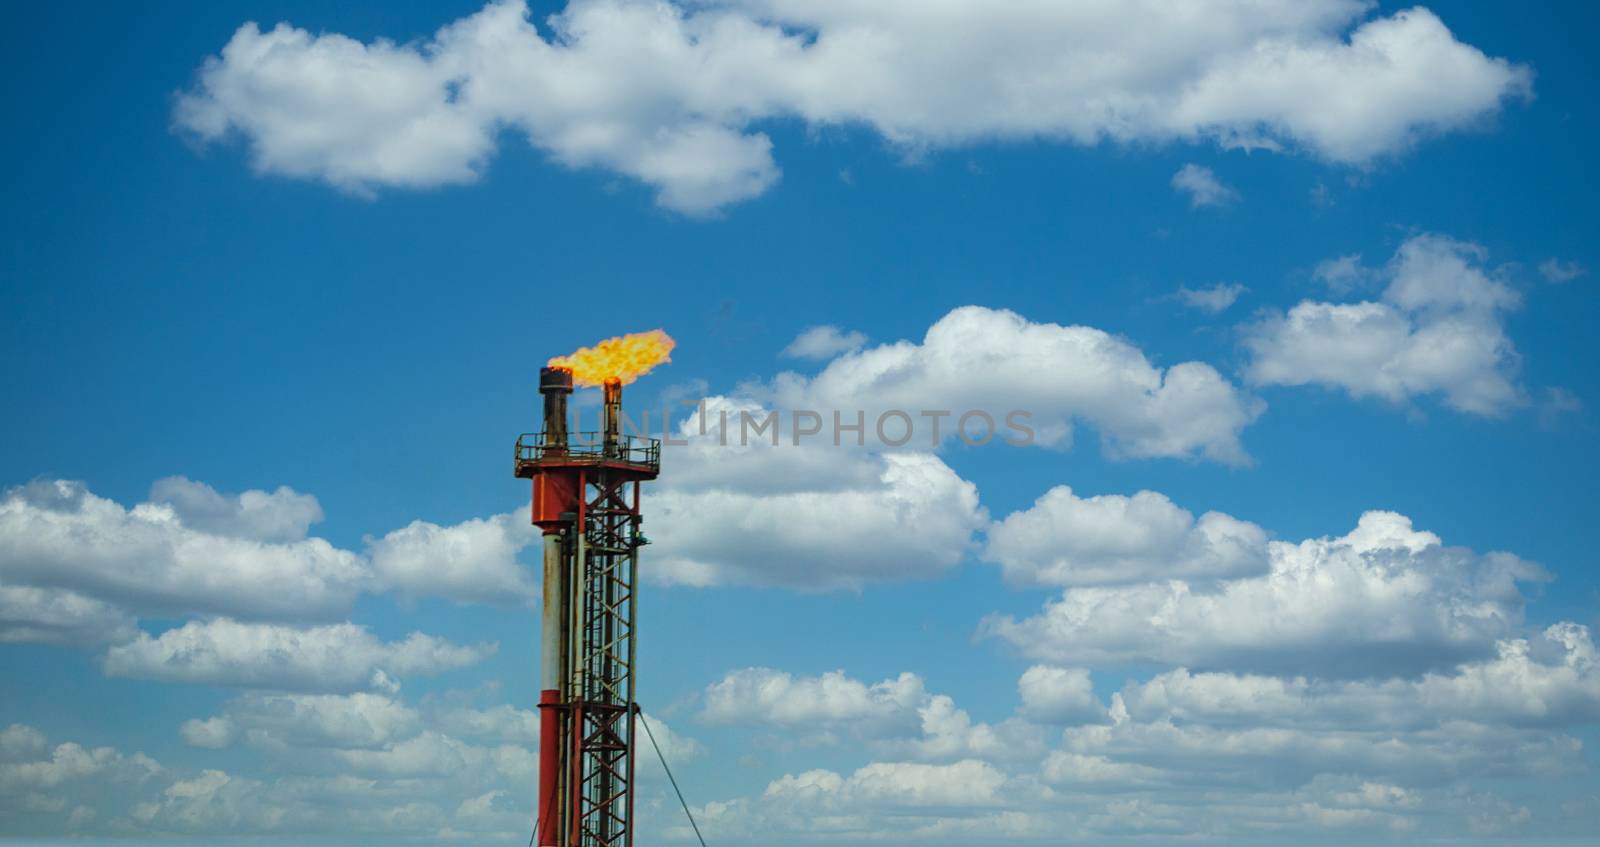 Oil Burning on Tower Rig by dbvirago